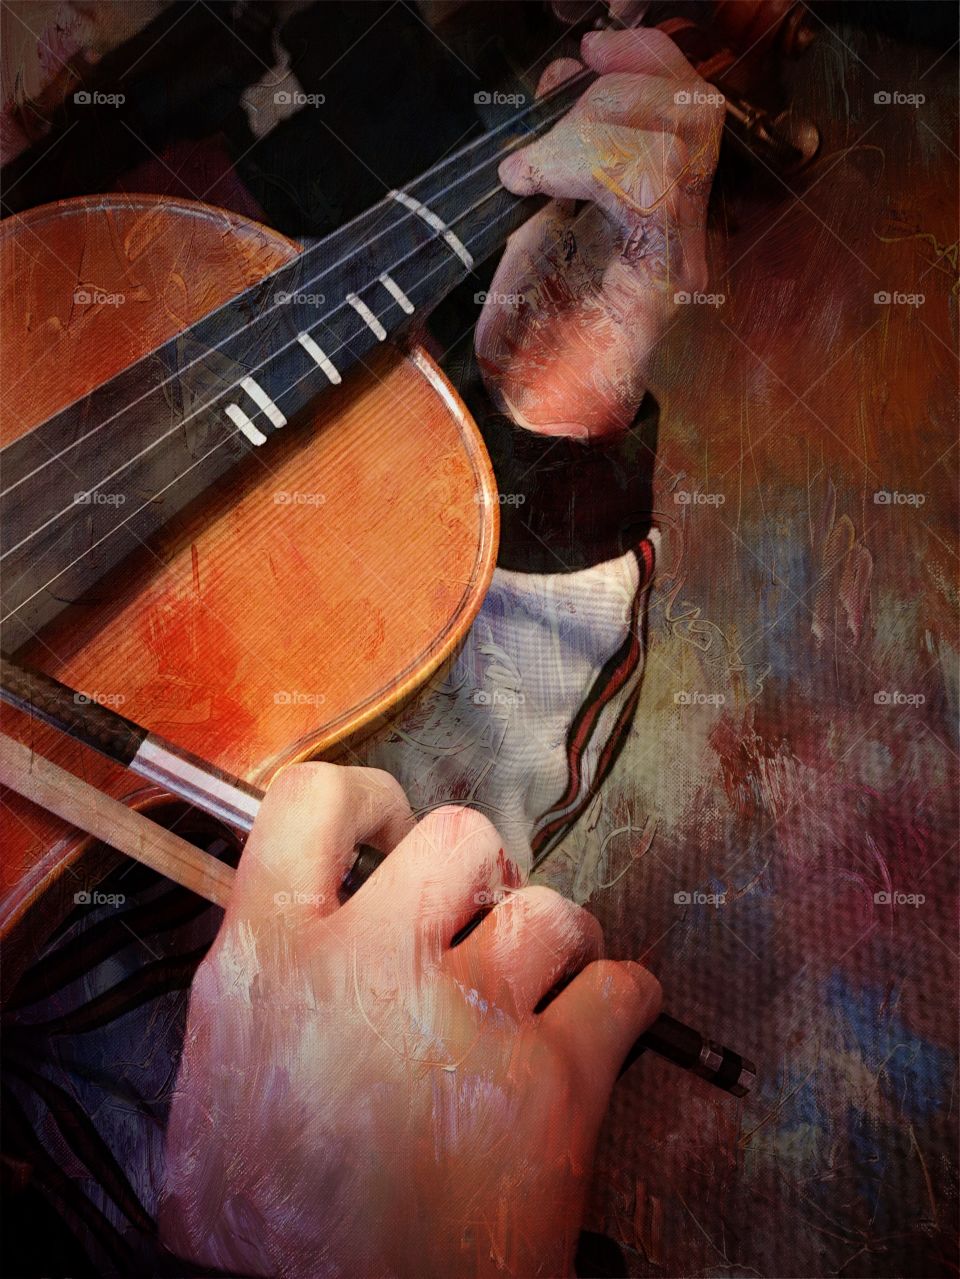 Working hands and violin painting effect